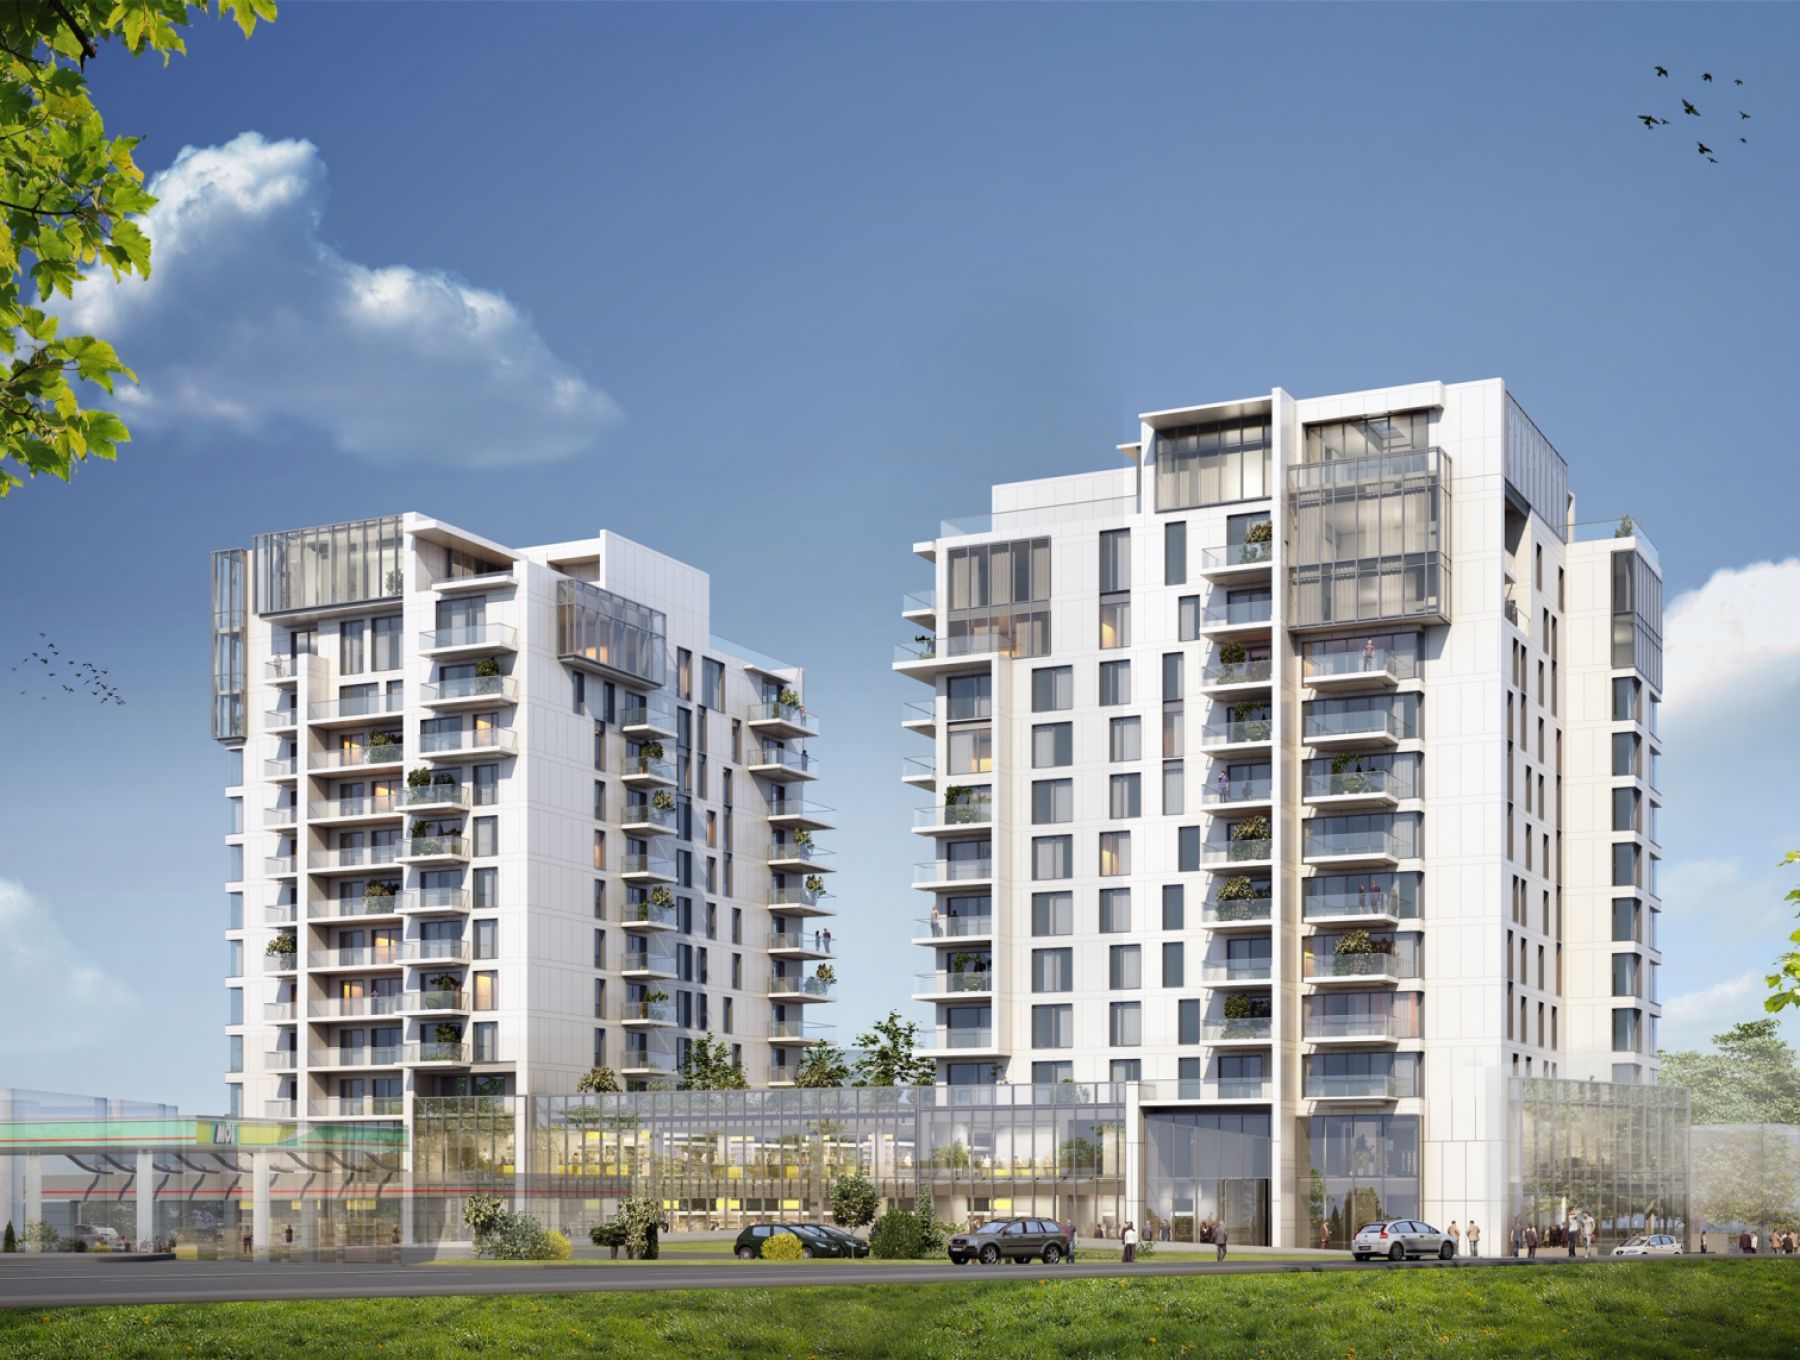 One United Properties has begun preparations for One Herăstrău Towers multifunctional real estate project